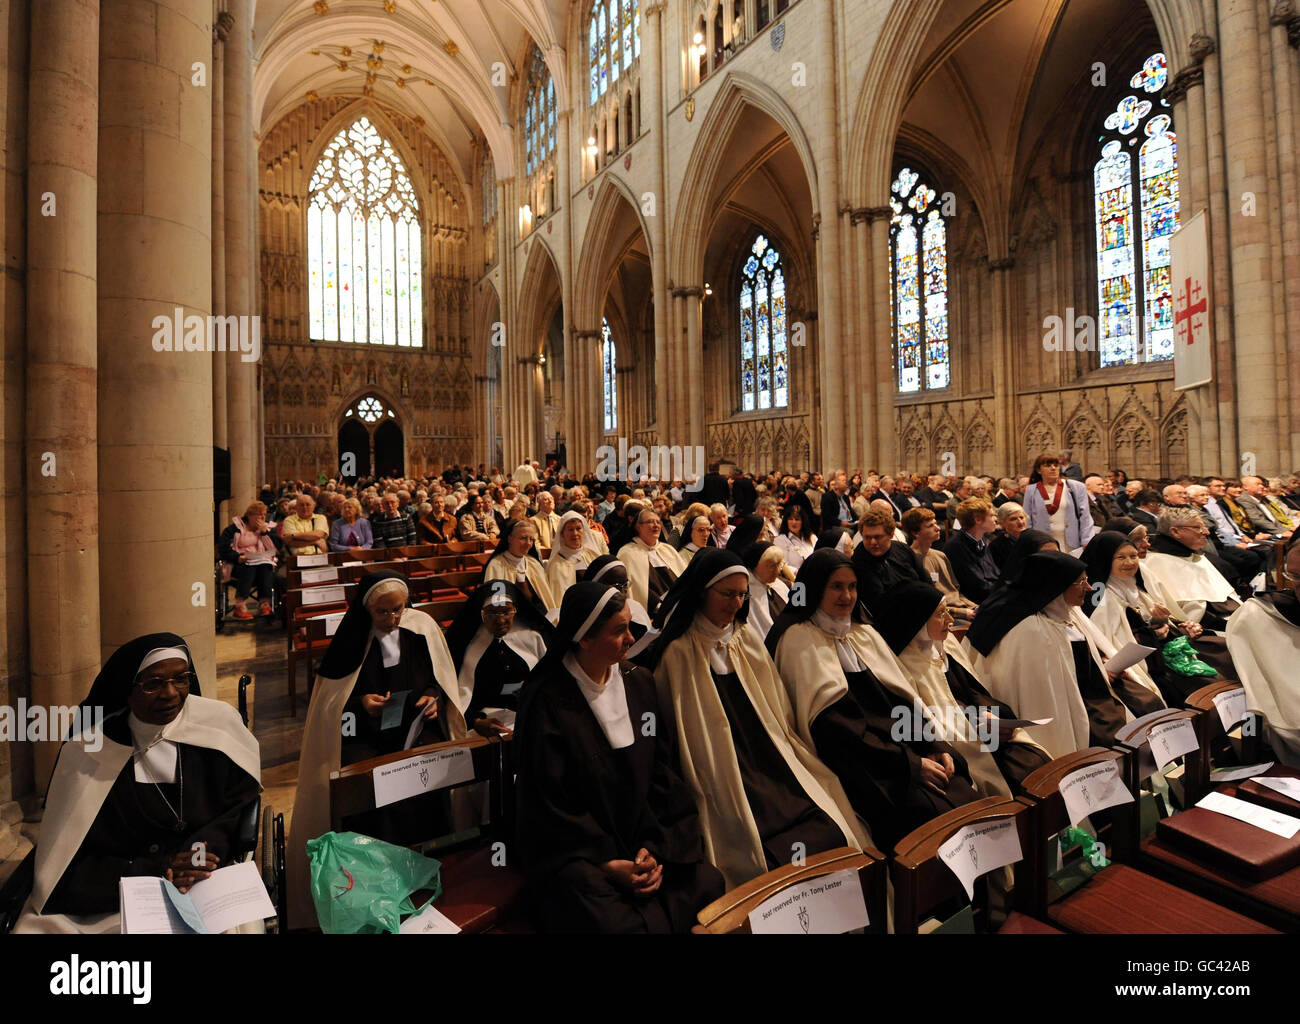 Nuns join hundreds of other pilgrims as they wait inside York Minster for the Relics of St. Therese of Lisieux to arrive at York Minster. Stock Photo